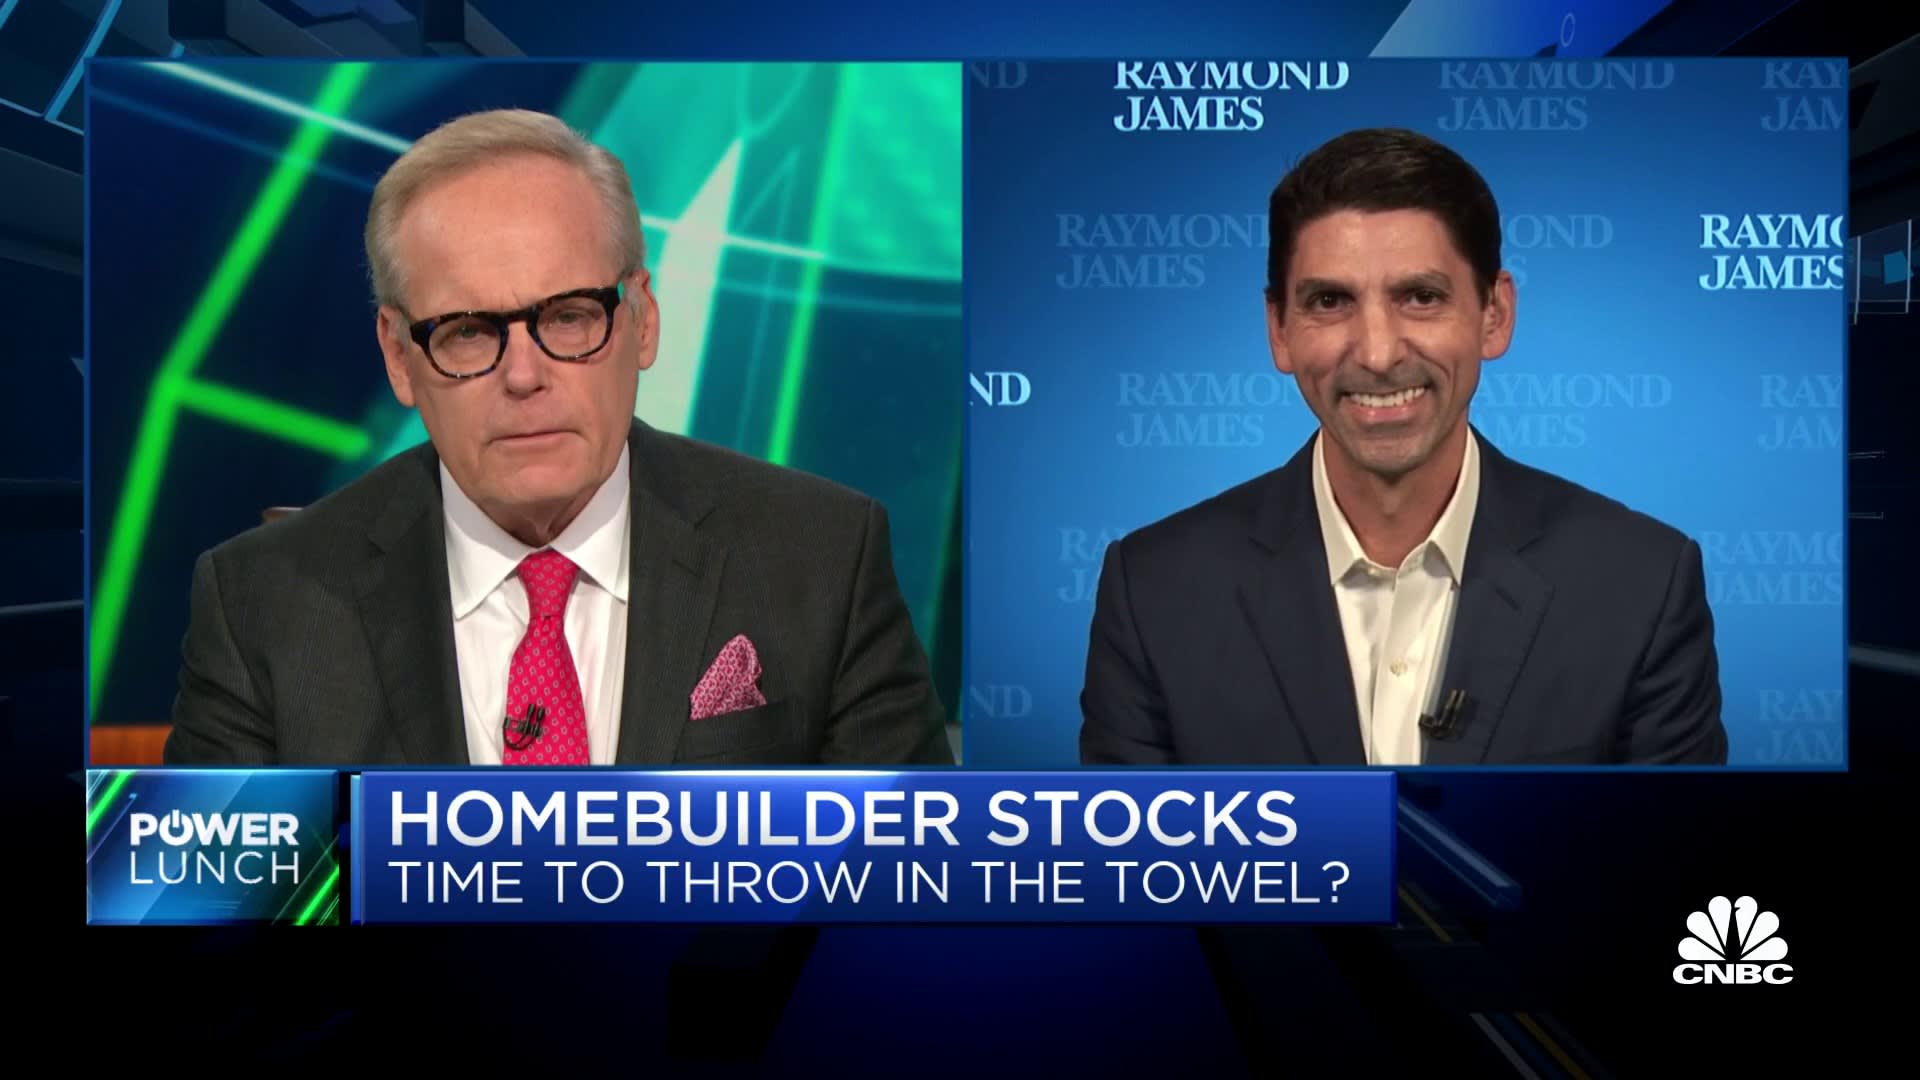 We consider housing is in a structural provide deficit, says Raymond James’ Horne